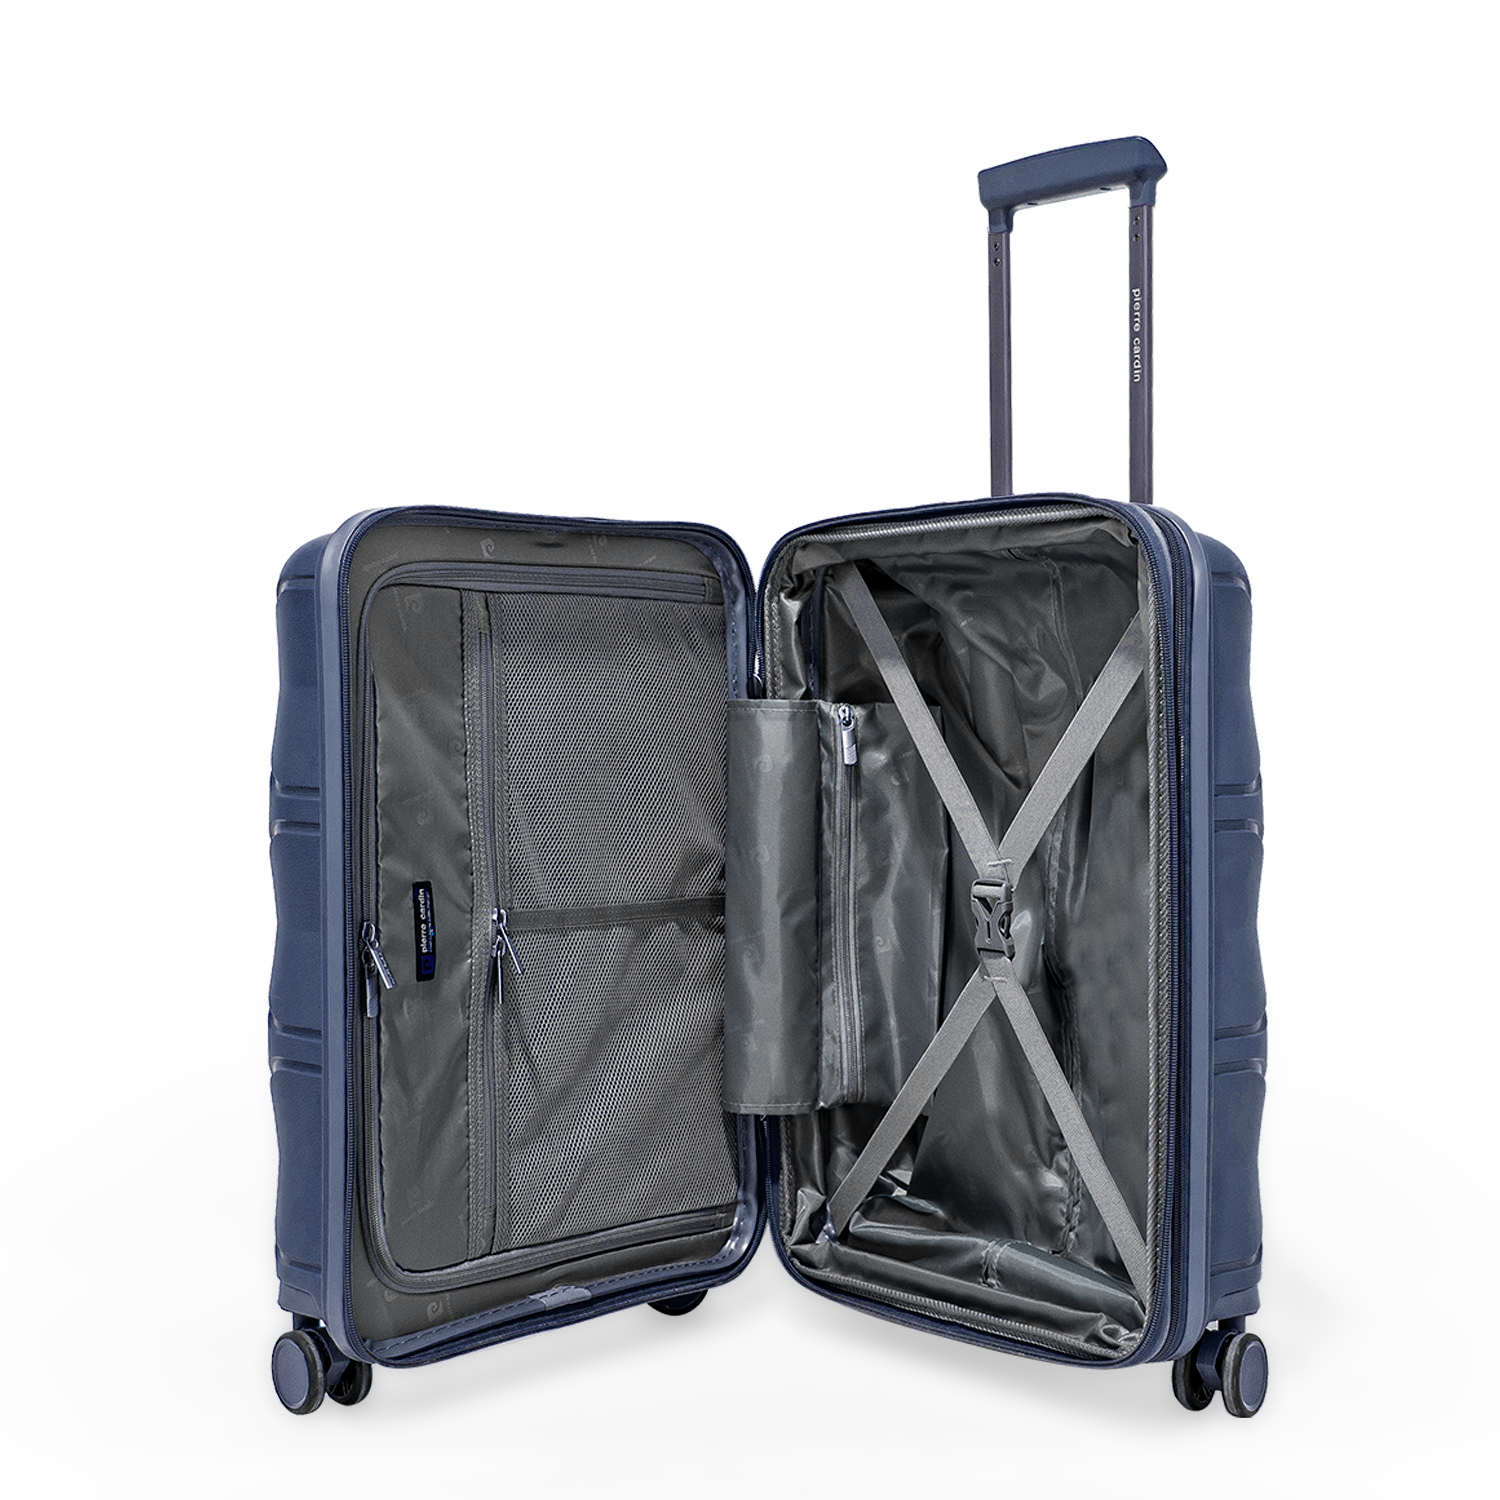 Pierre Cardin Trolley Strong Flexible Suitcases Set of 3 GreyBlue